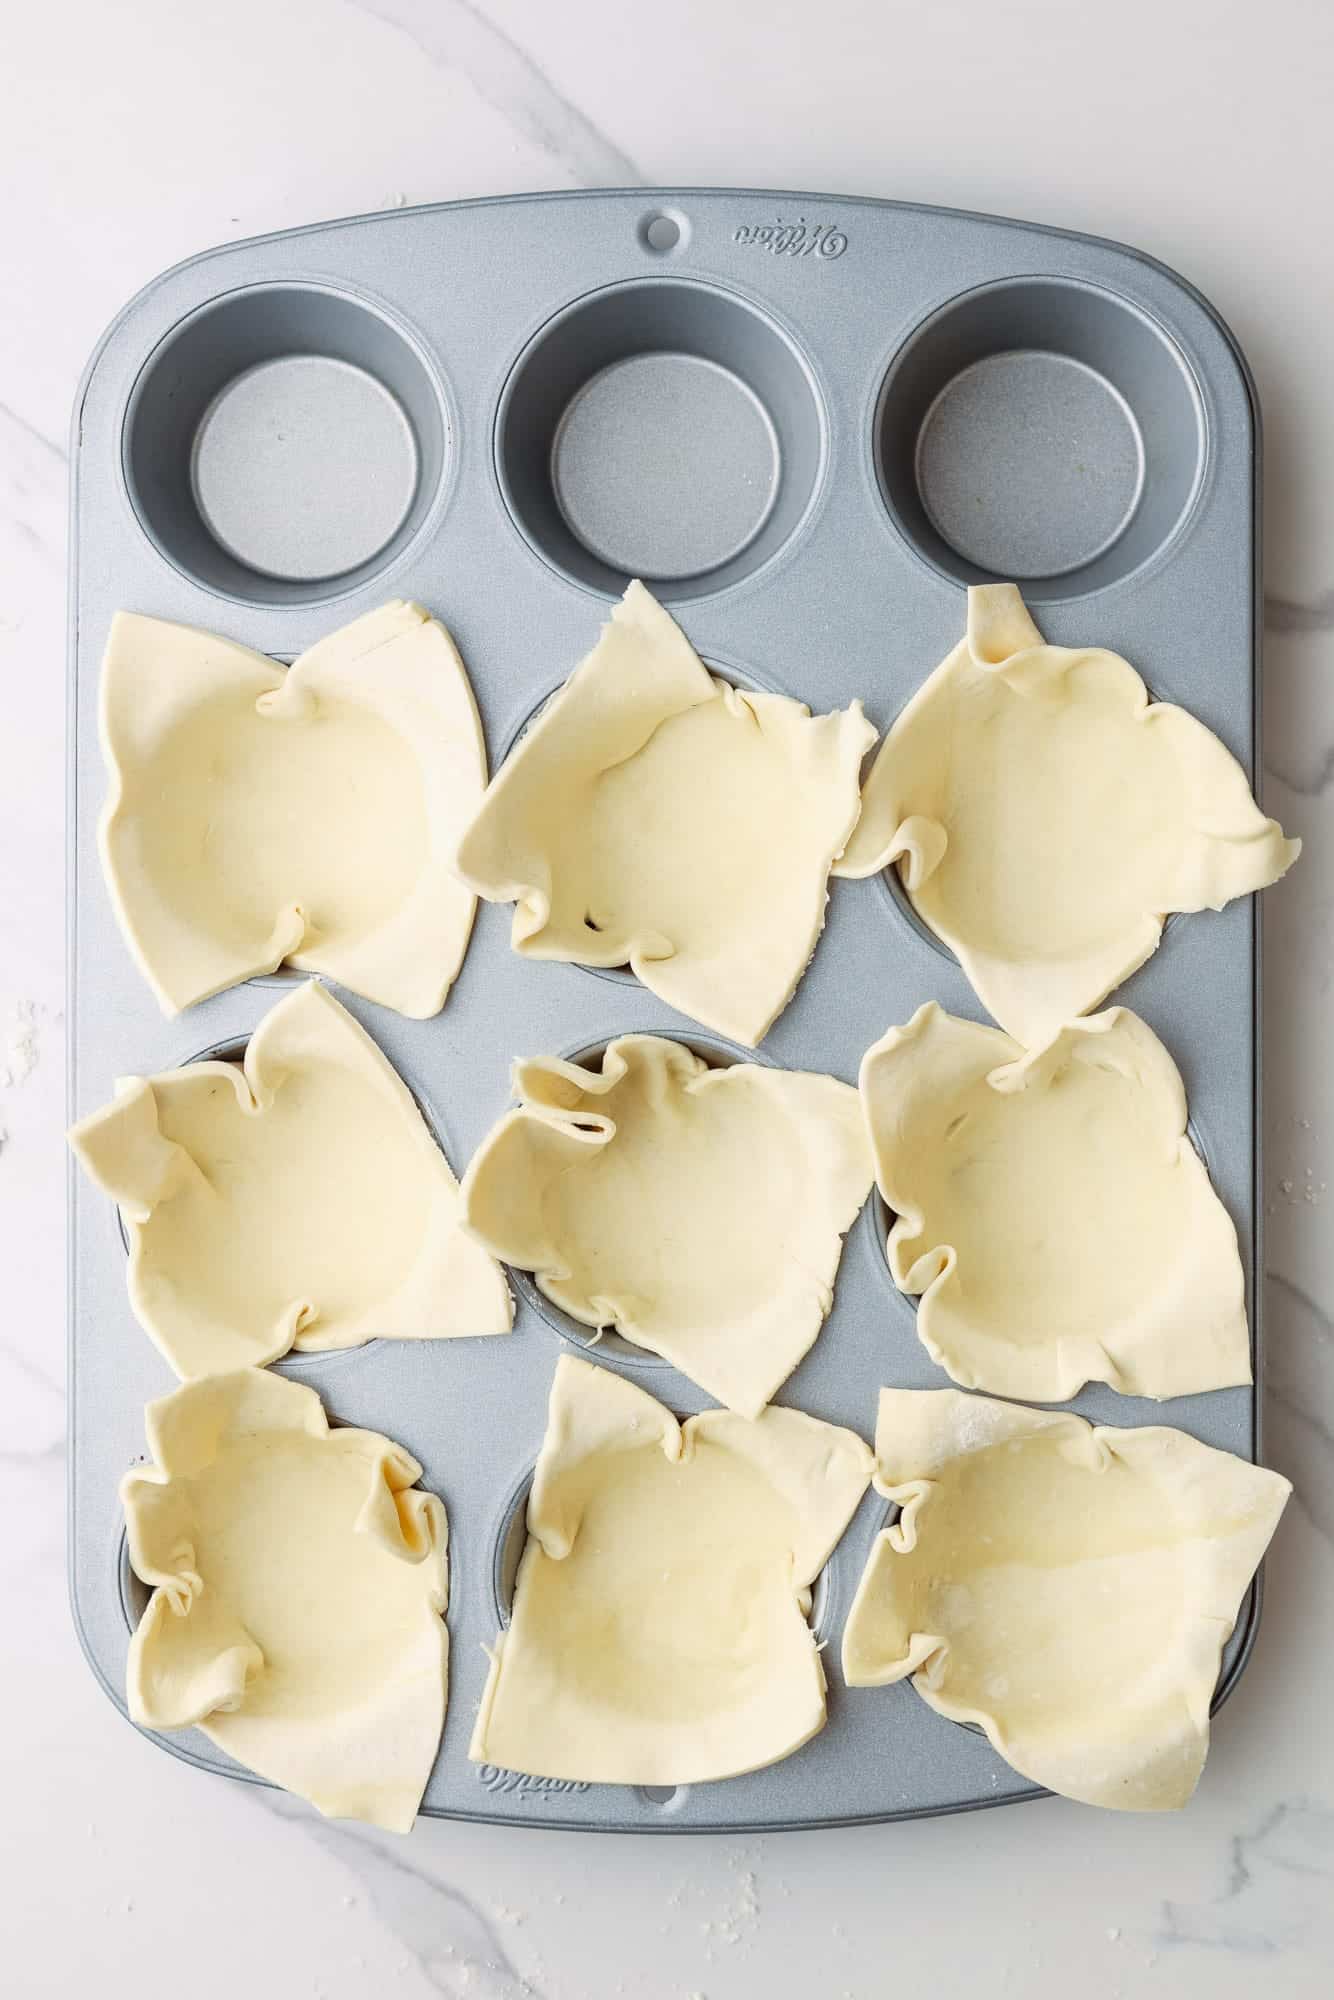 a silver muffin pan. 9 of the spaces are lined with squares of puff pastry dough. 